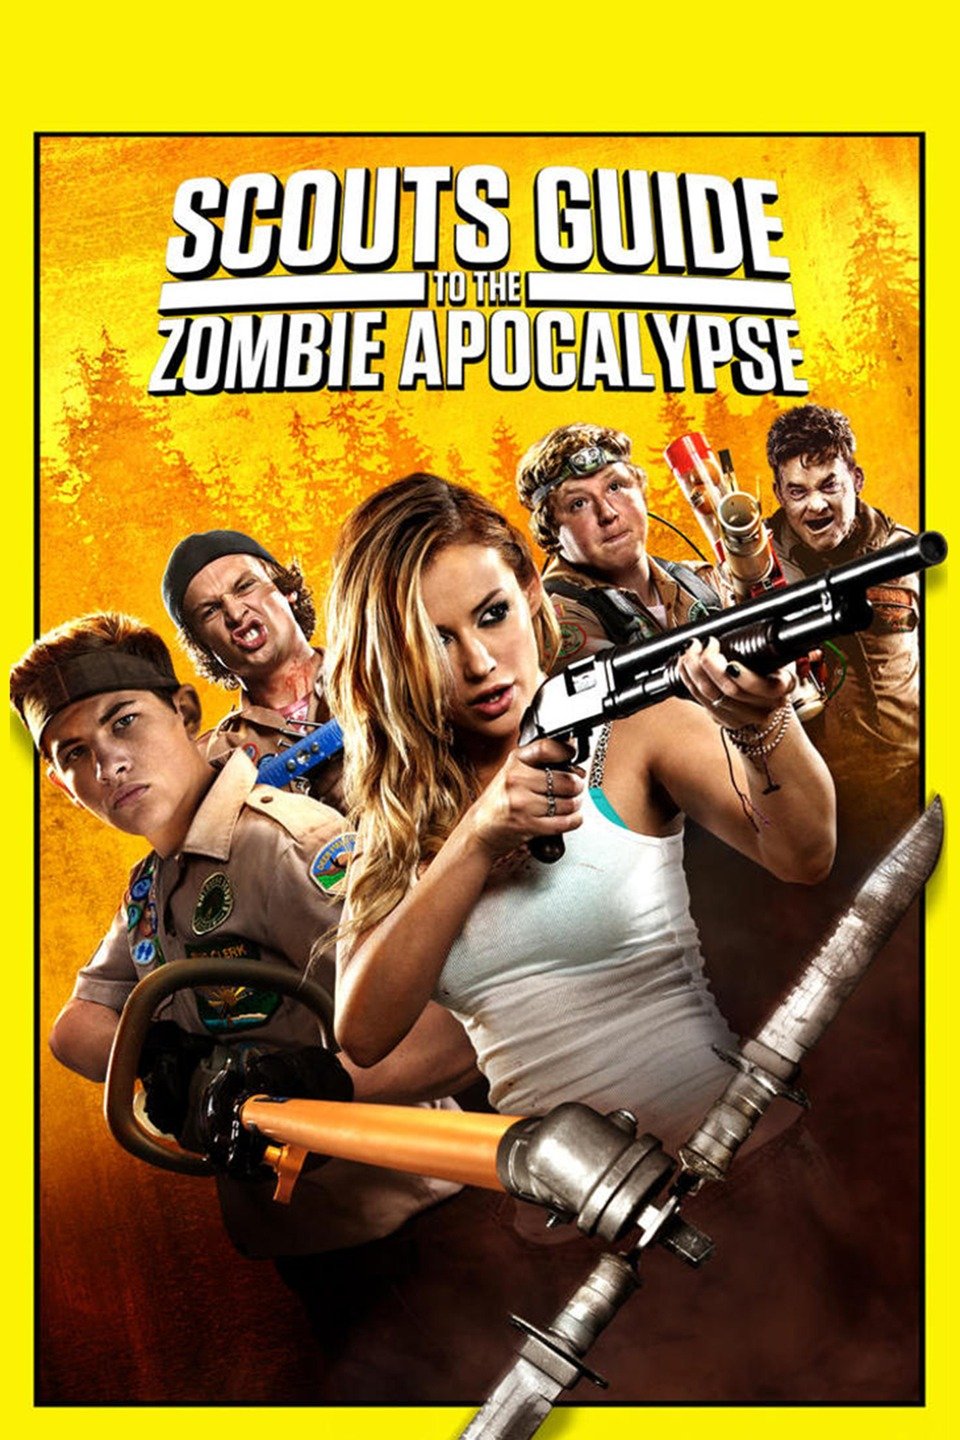 Scouts Guide to the Zombie Apocalypse - Rotten Tomatoes